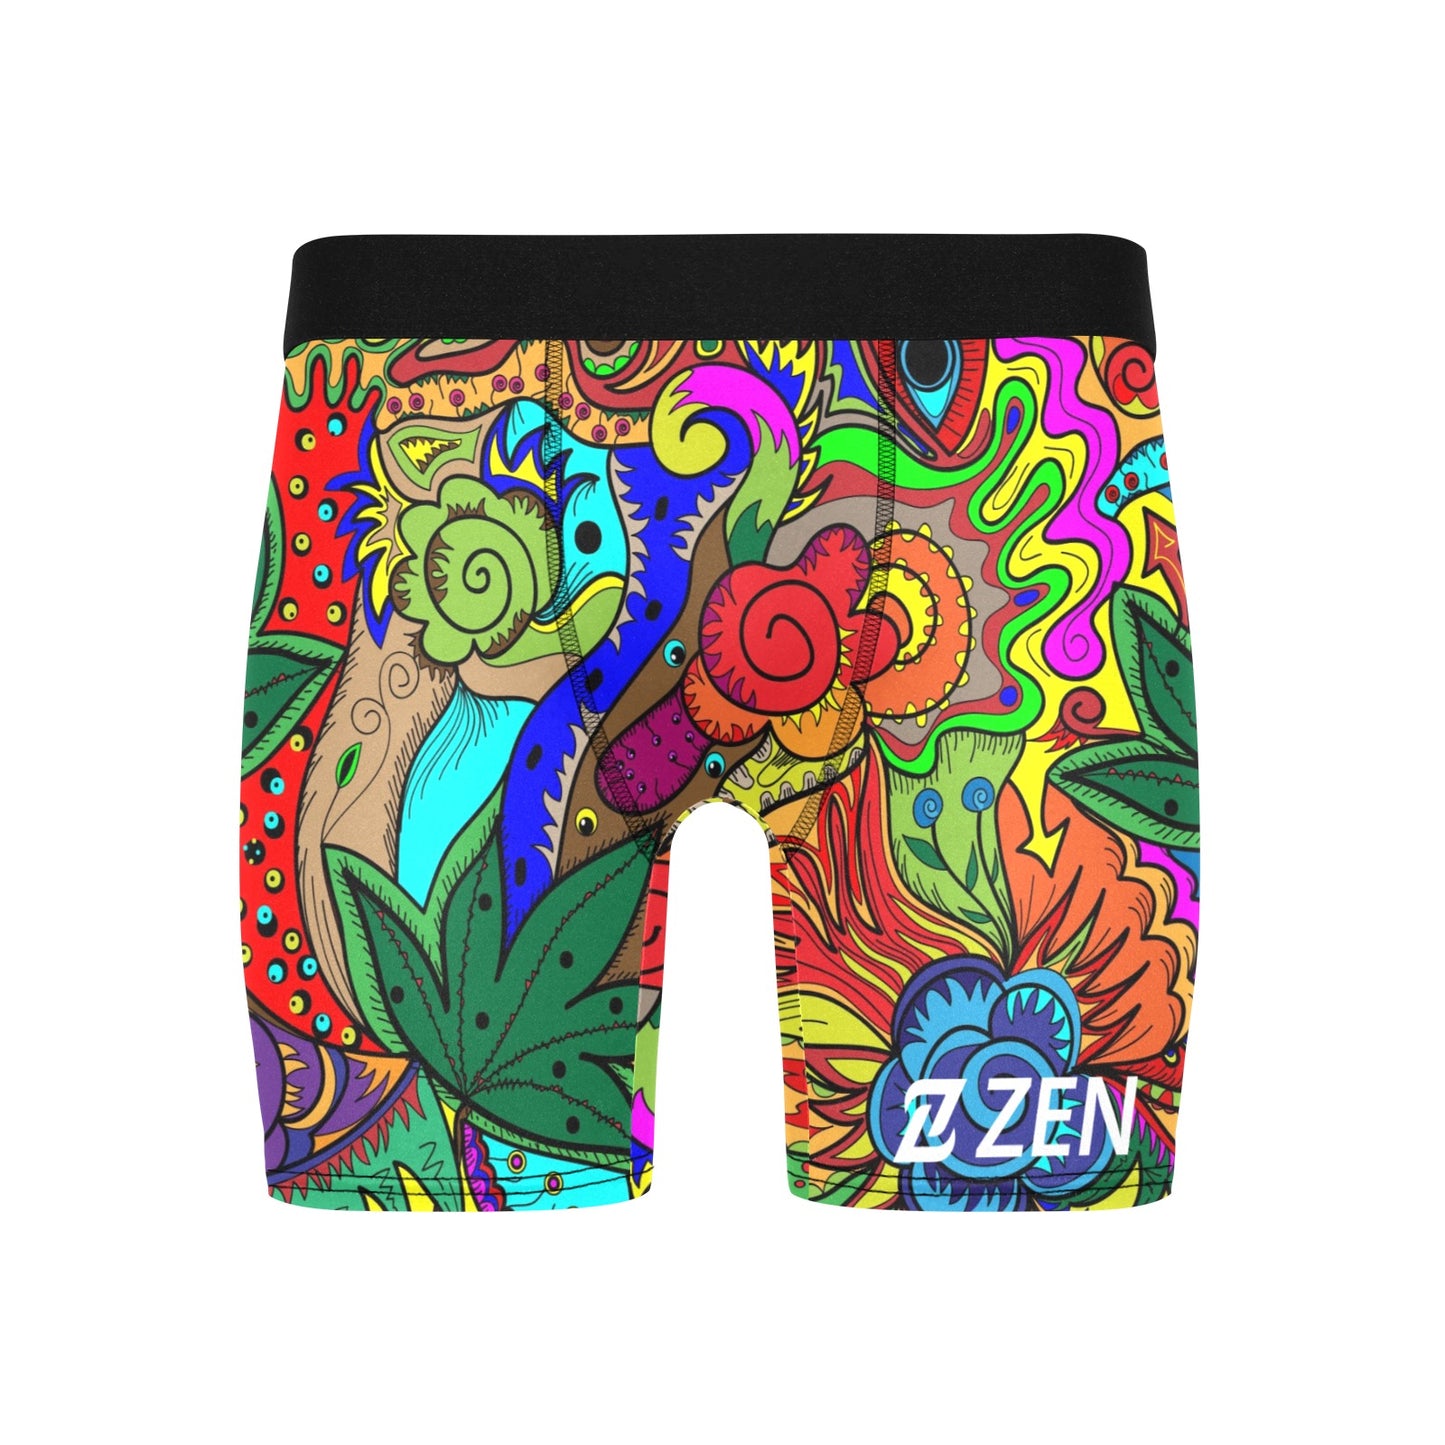 Zen Boxers Long - Reefer Madness